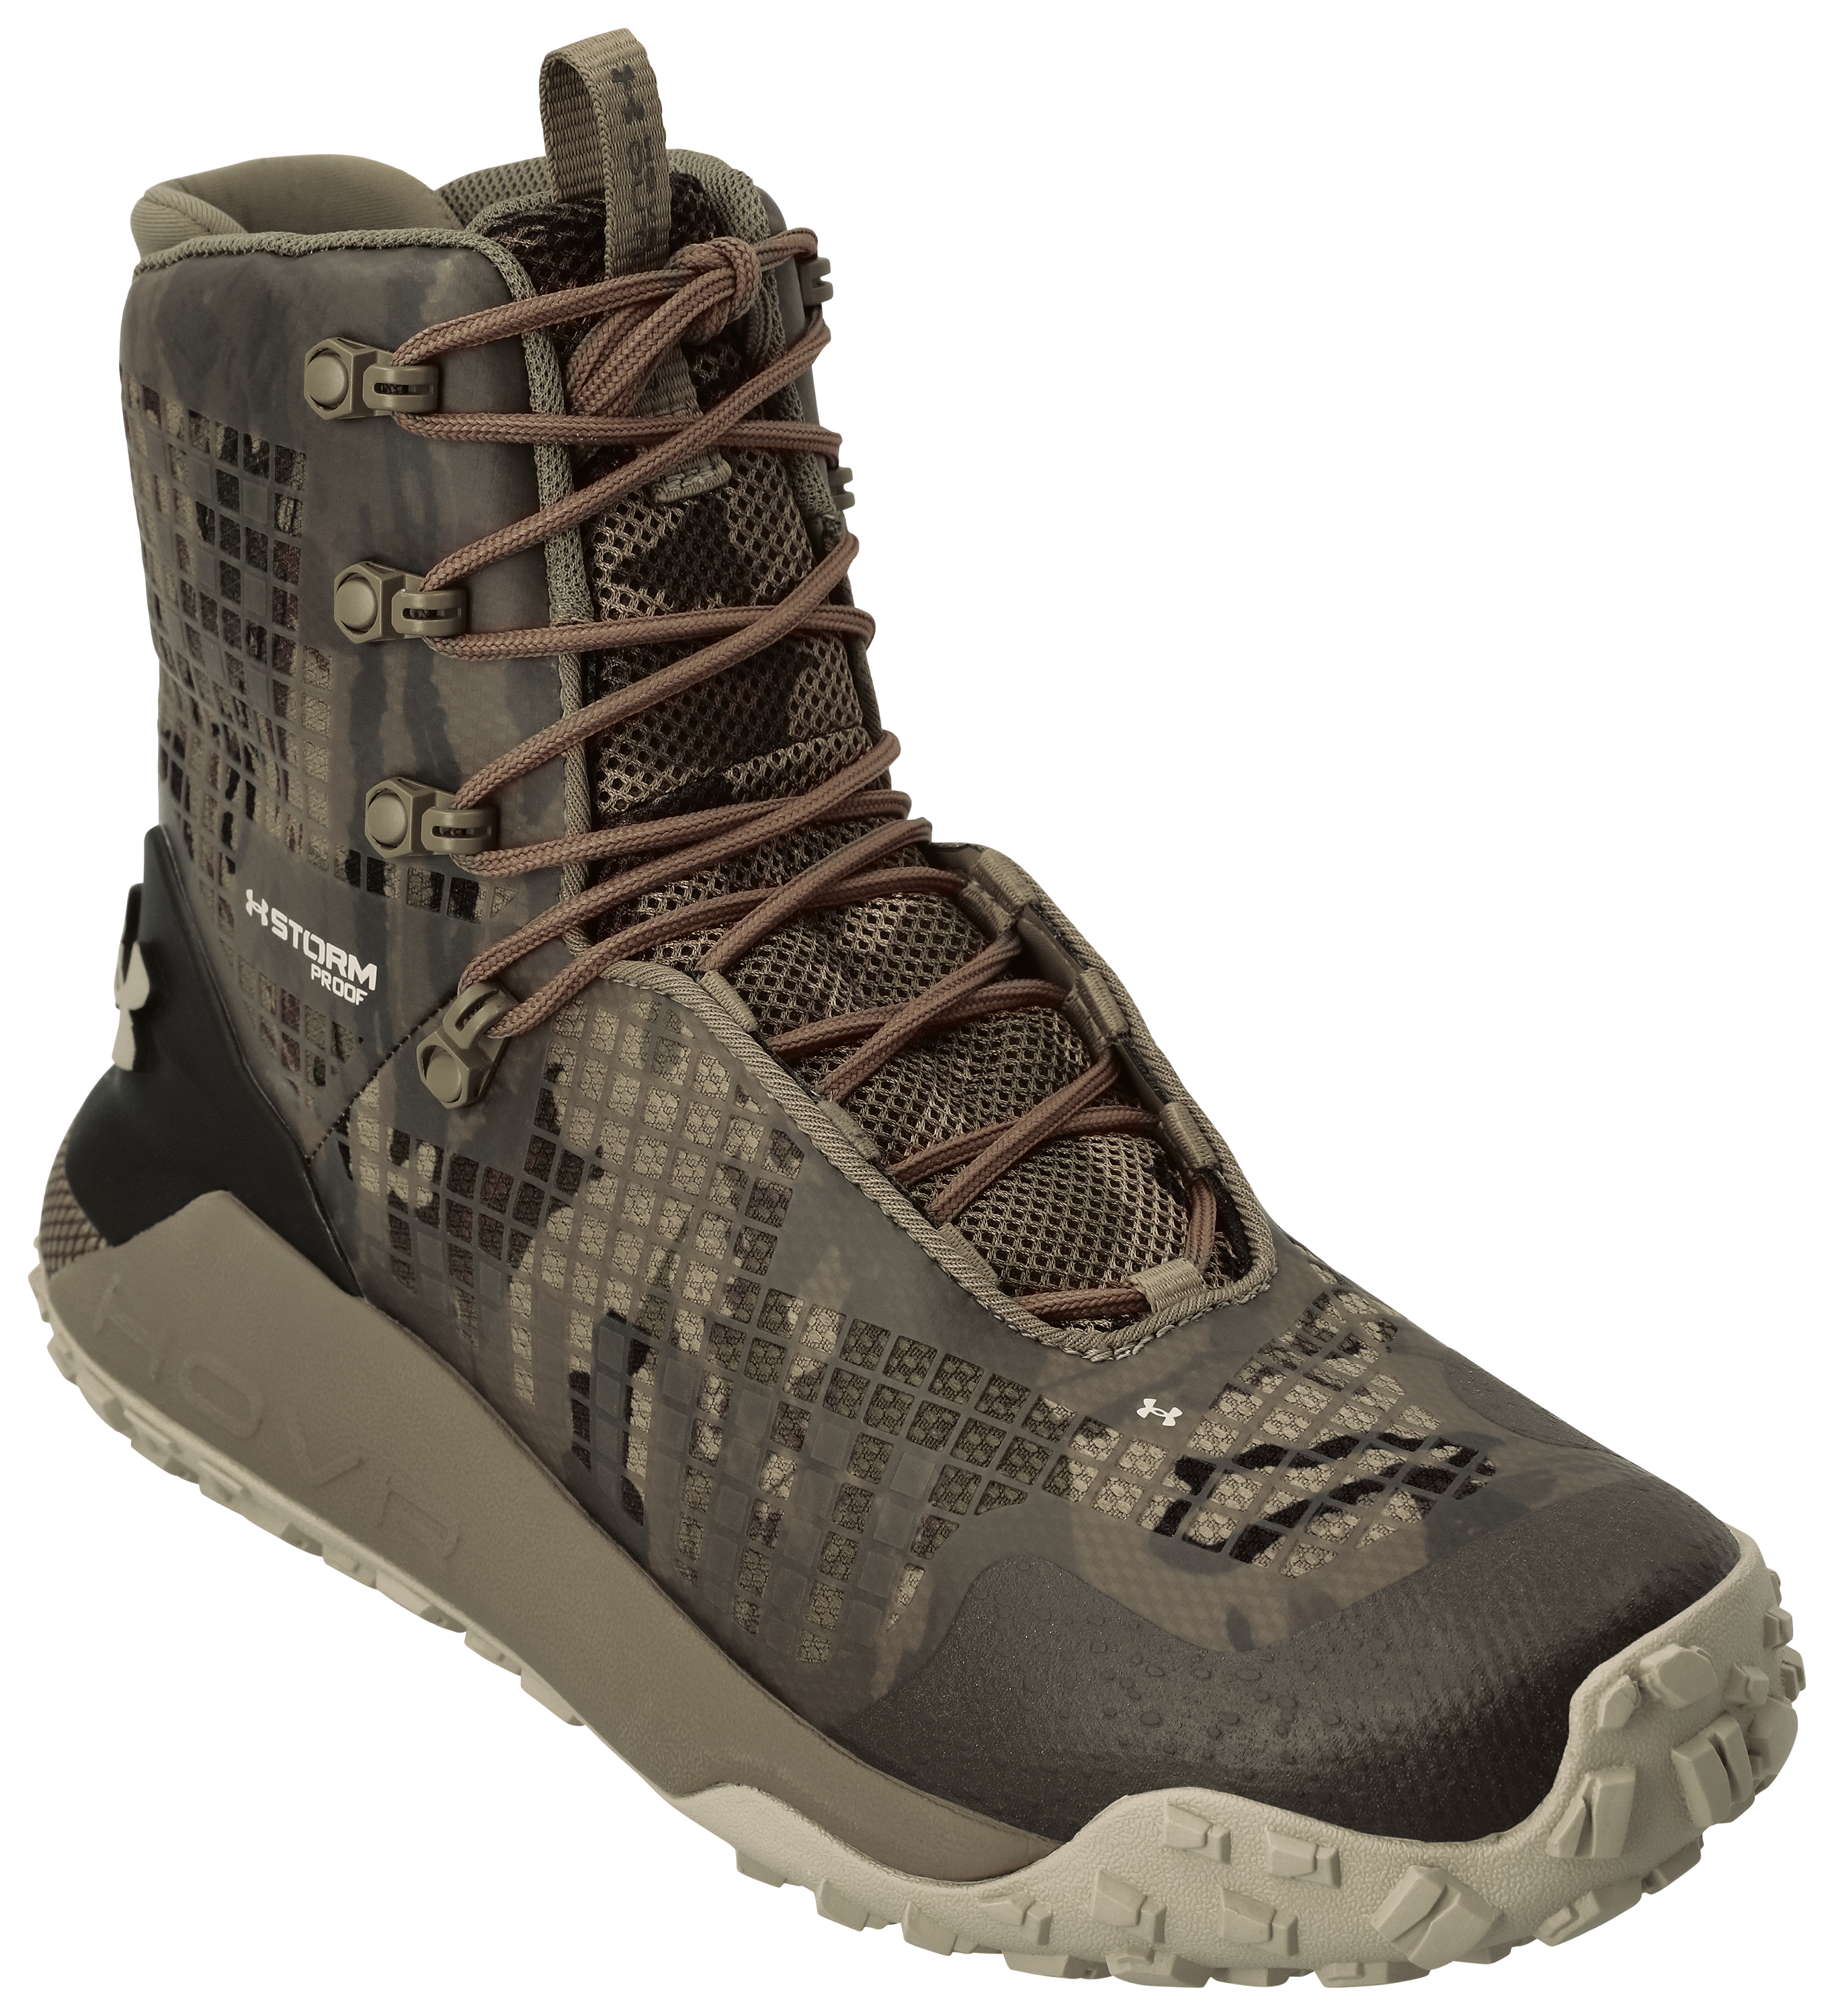 Under Armour Brown Boots for Women